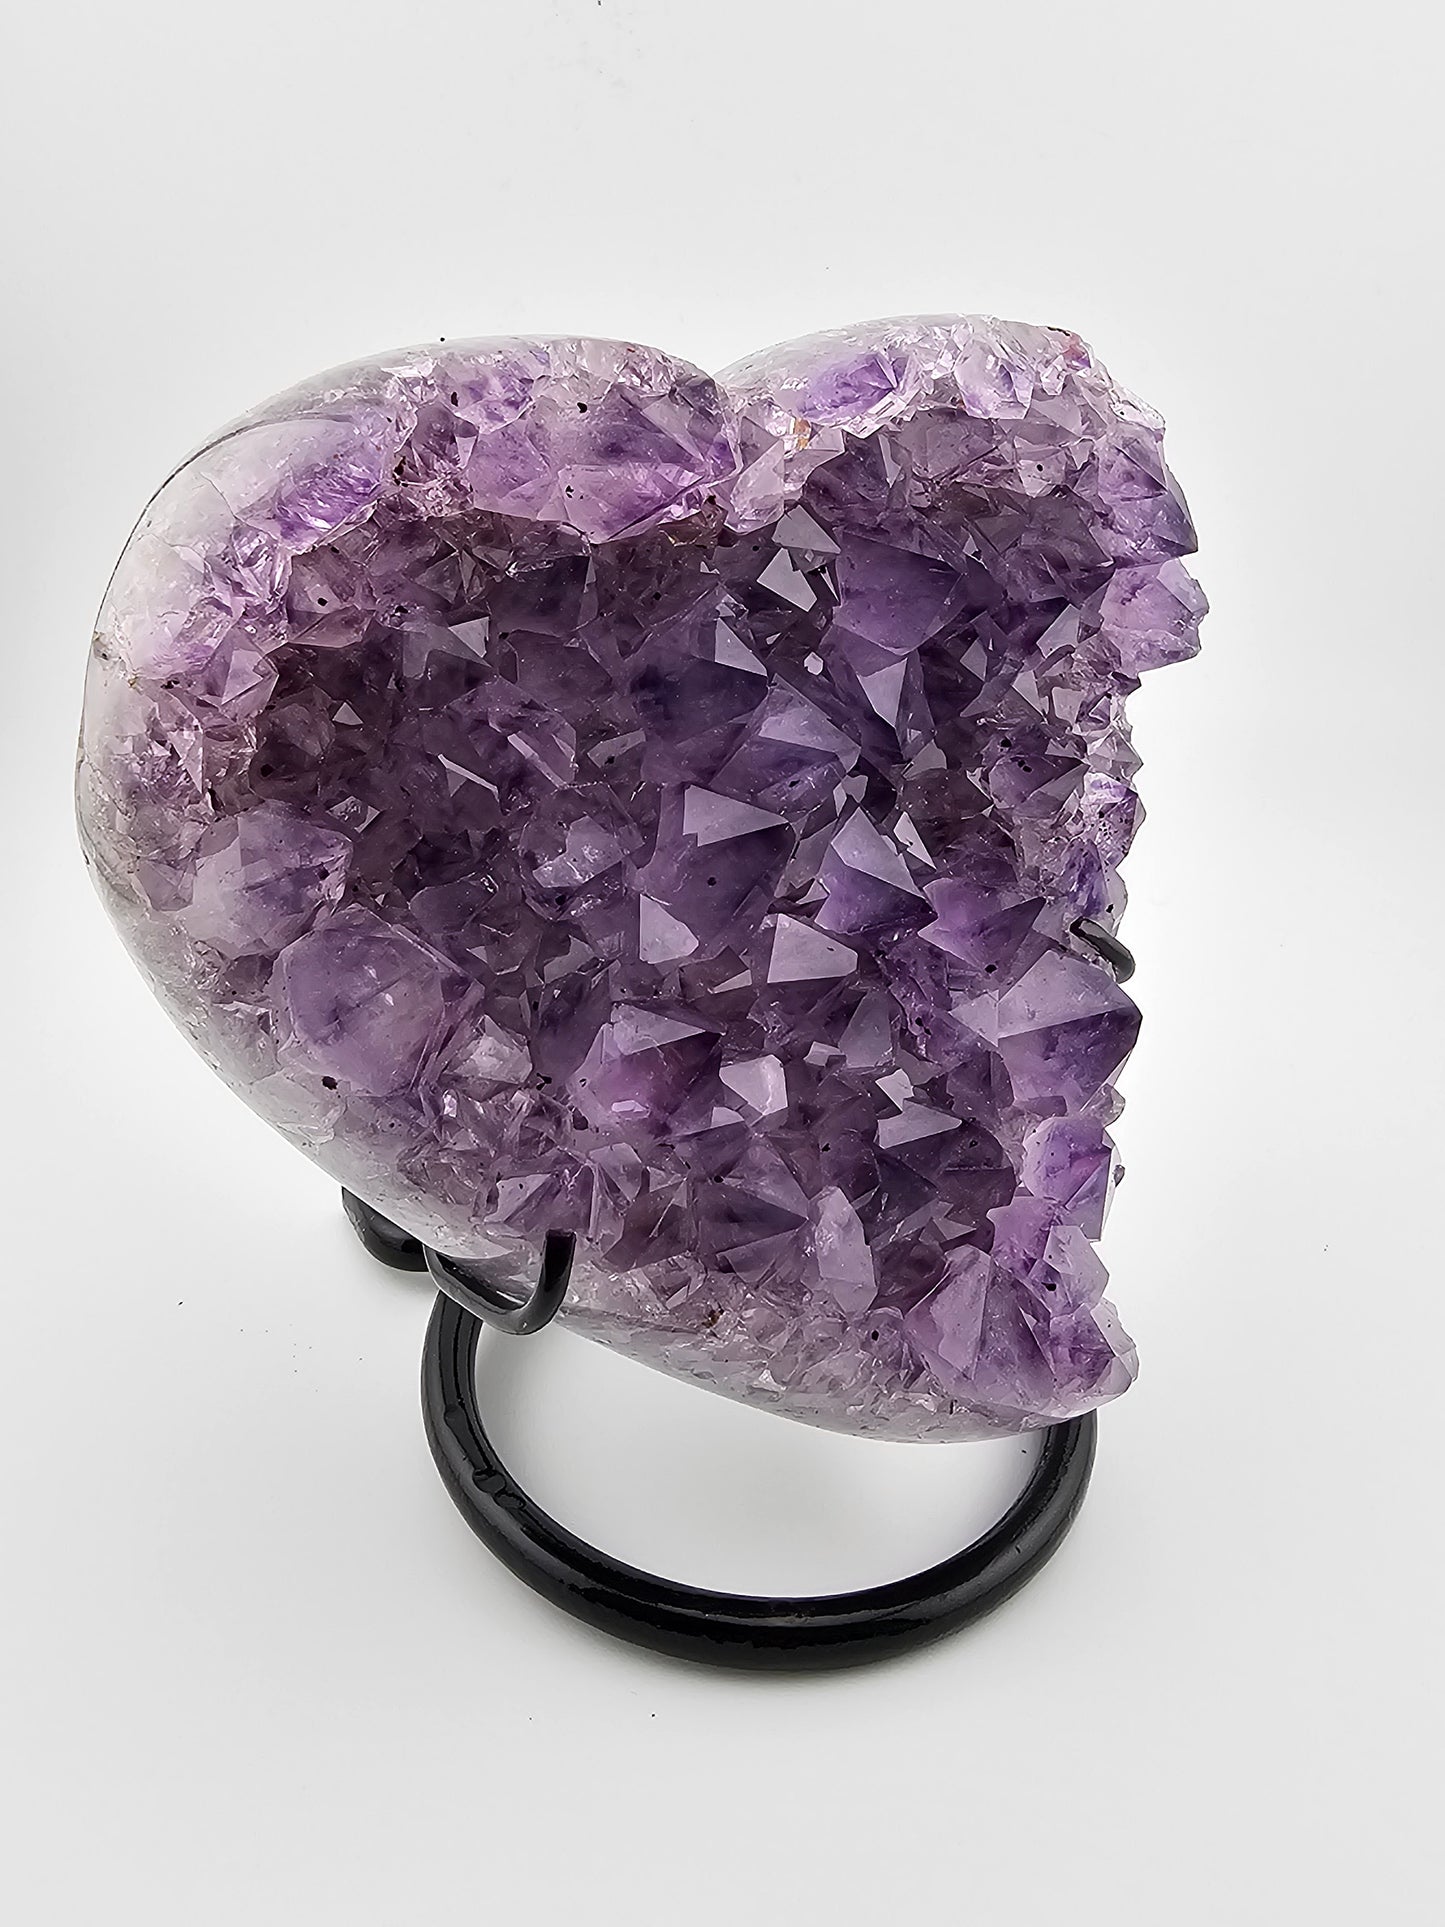 Amethyst Heart on stand